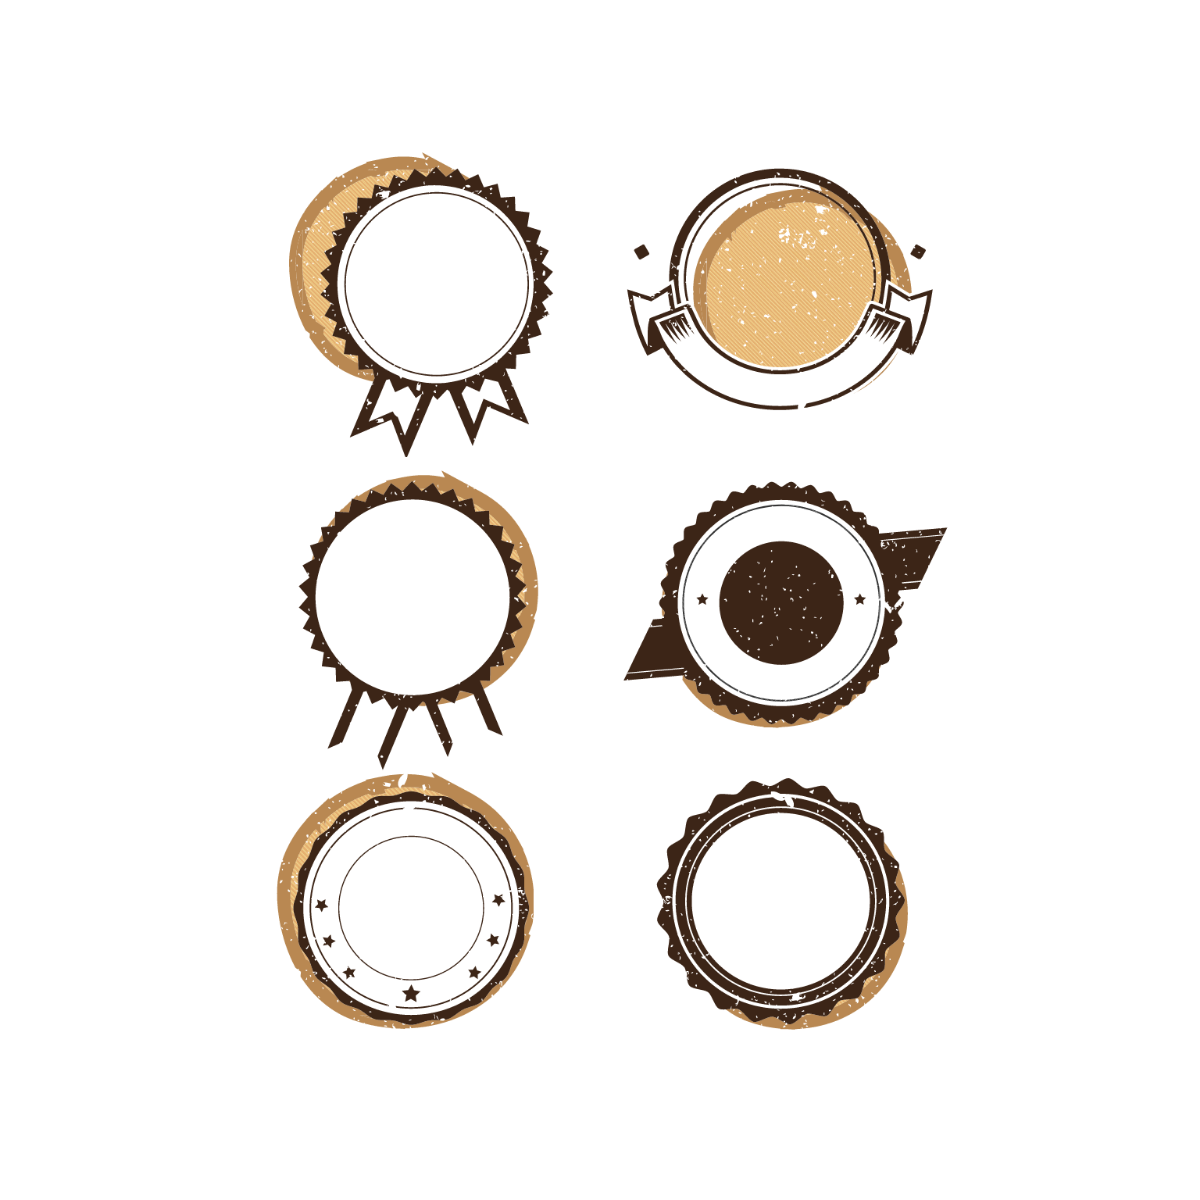 Free Vintage Circle Vector Template